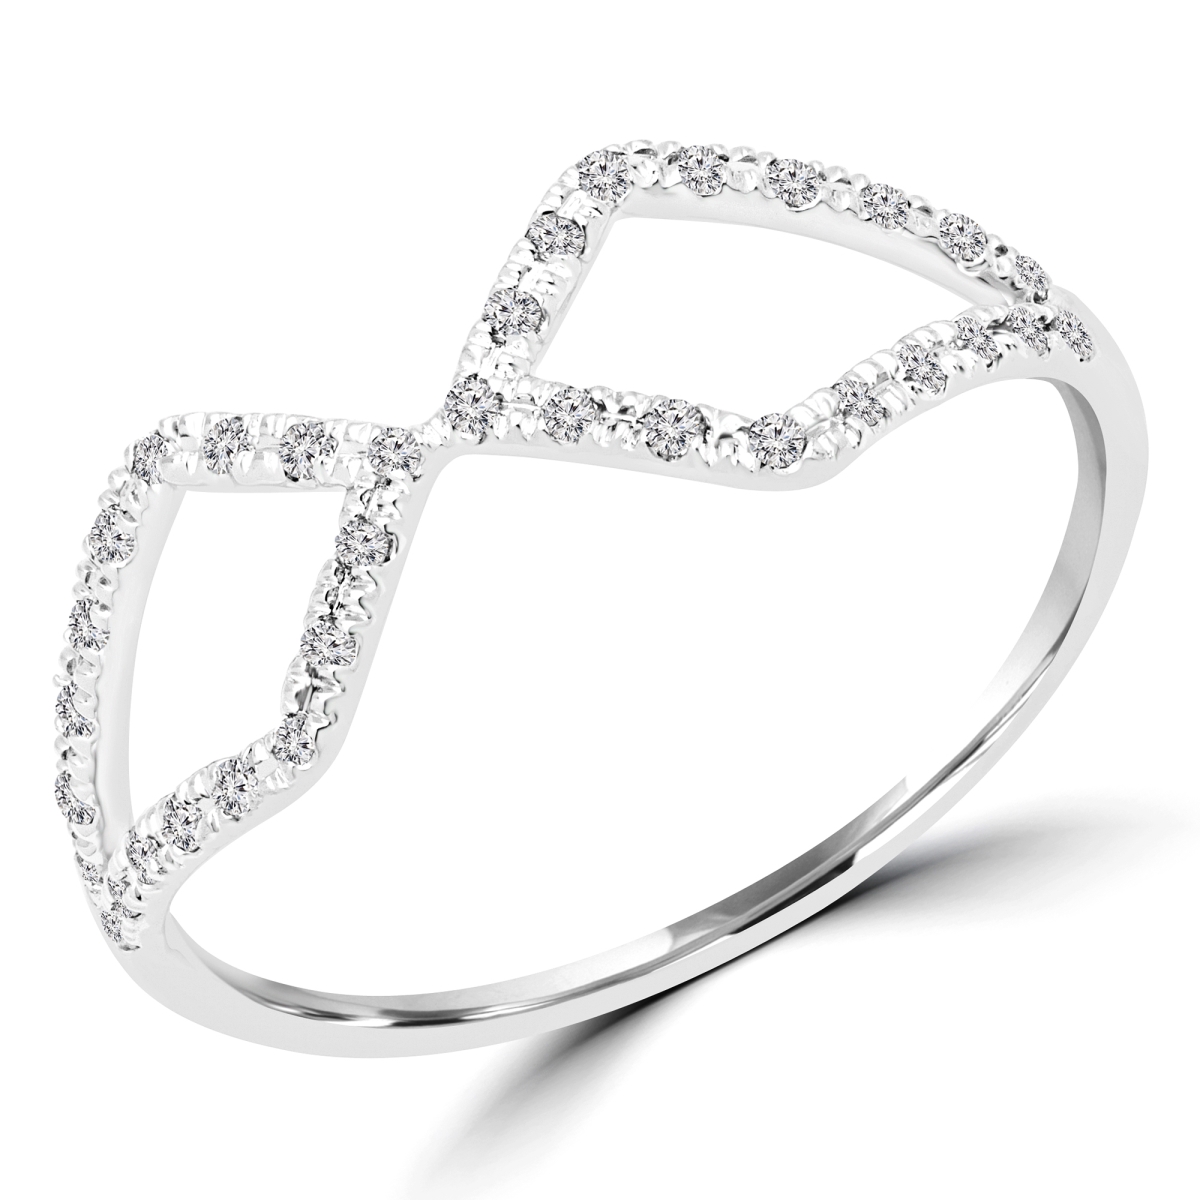 Picture of Majesty Diamonds MDR170055-3.5 0.12 CTW Round Diamond Cocktail Ring in 14K White Gold - 3.5